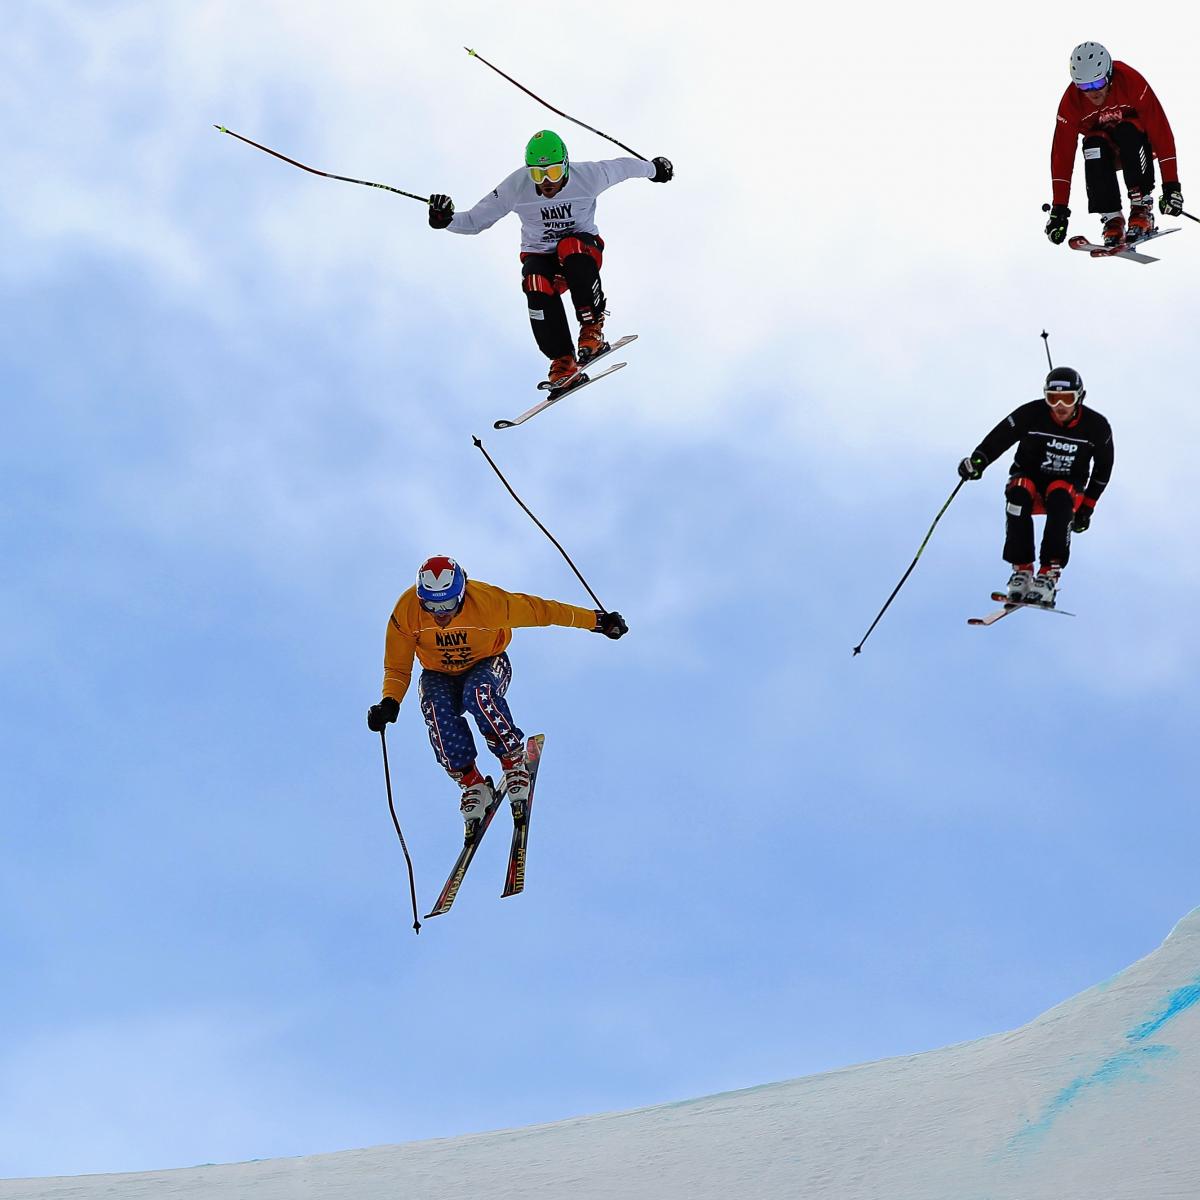 Winter X Games Schedule Event Dates and Full TV Info News, Scores